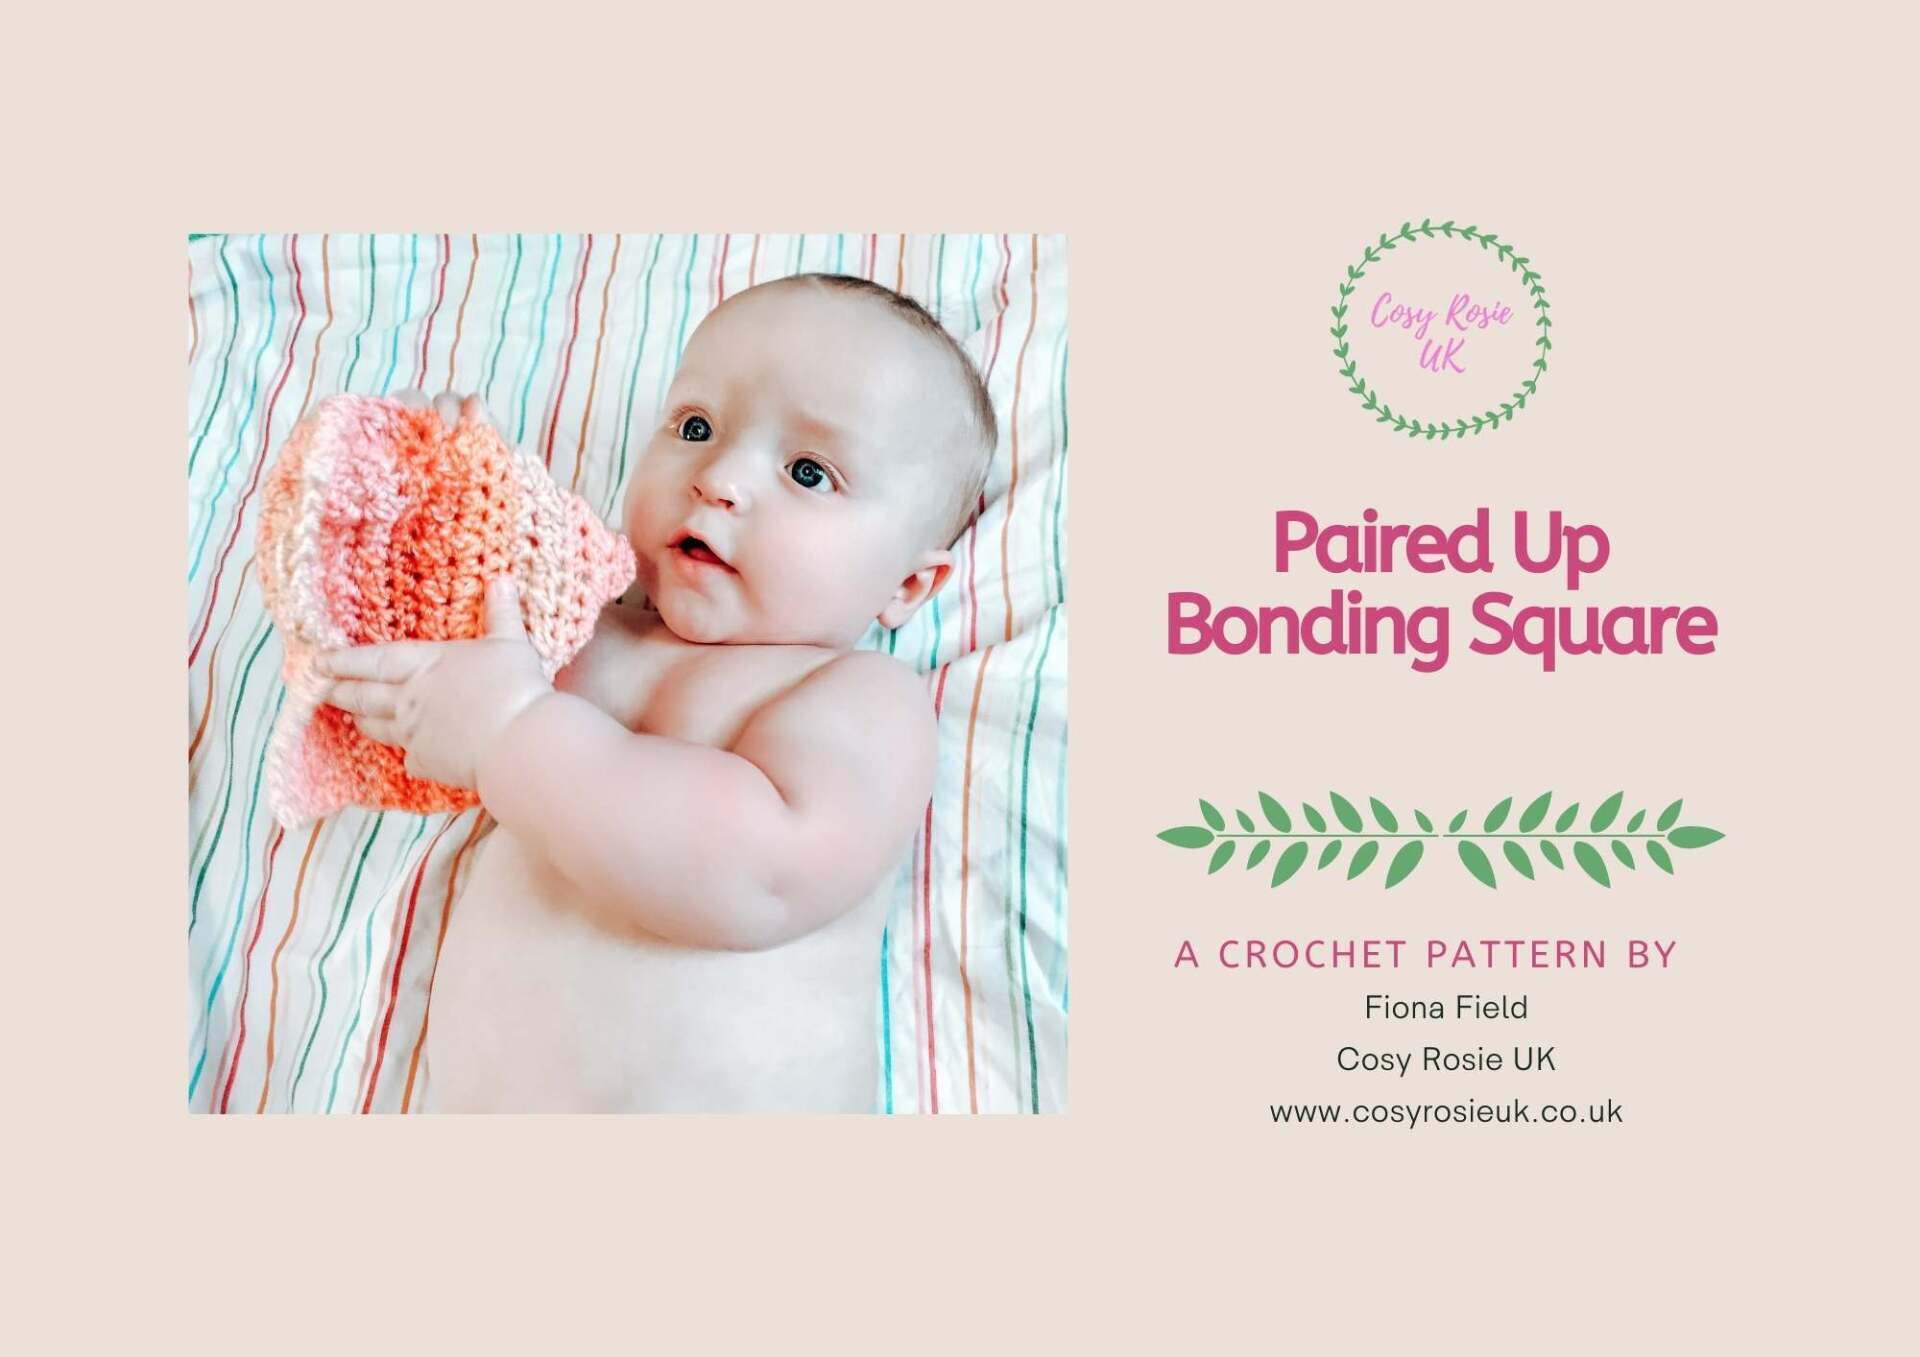 Paired Up Bonding Square